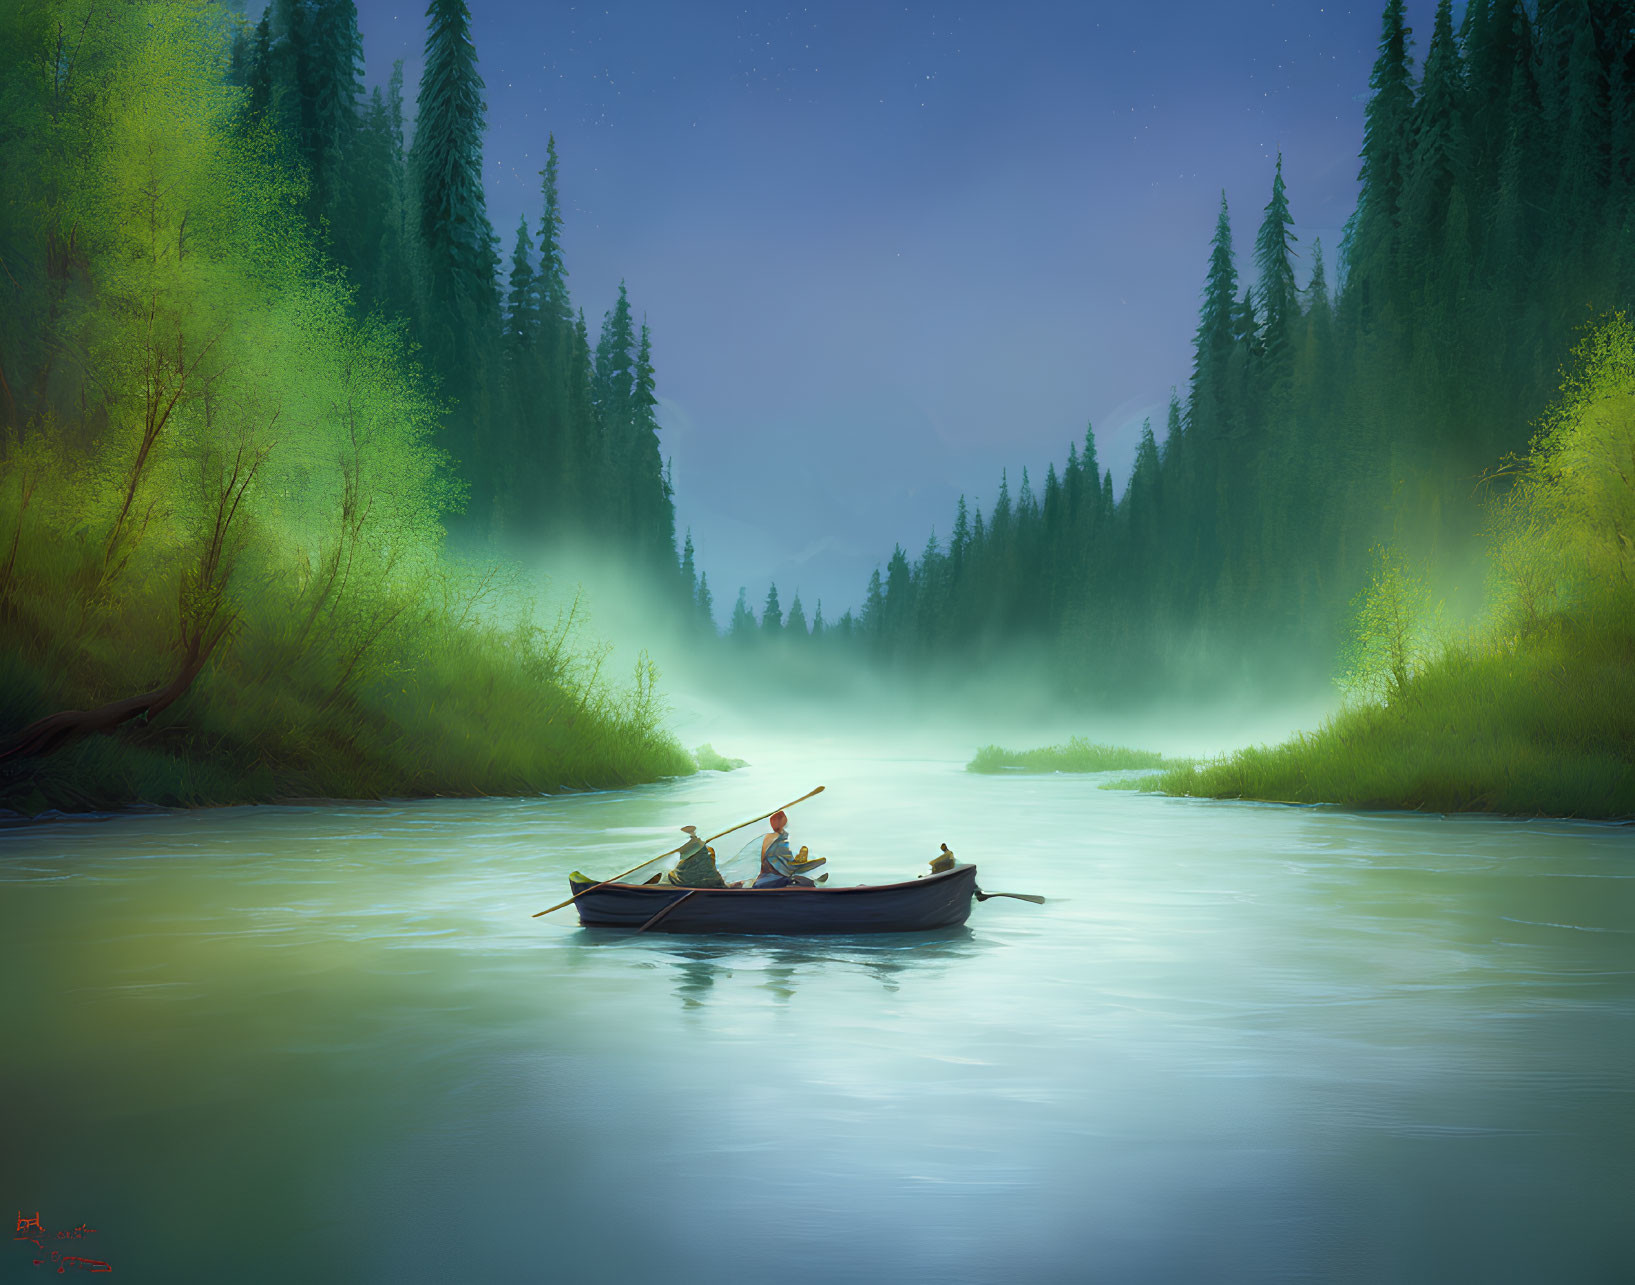 Misty forest river scene with three people rowing boat